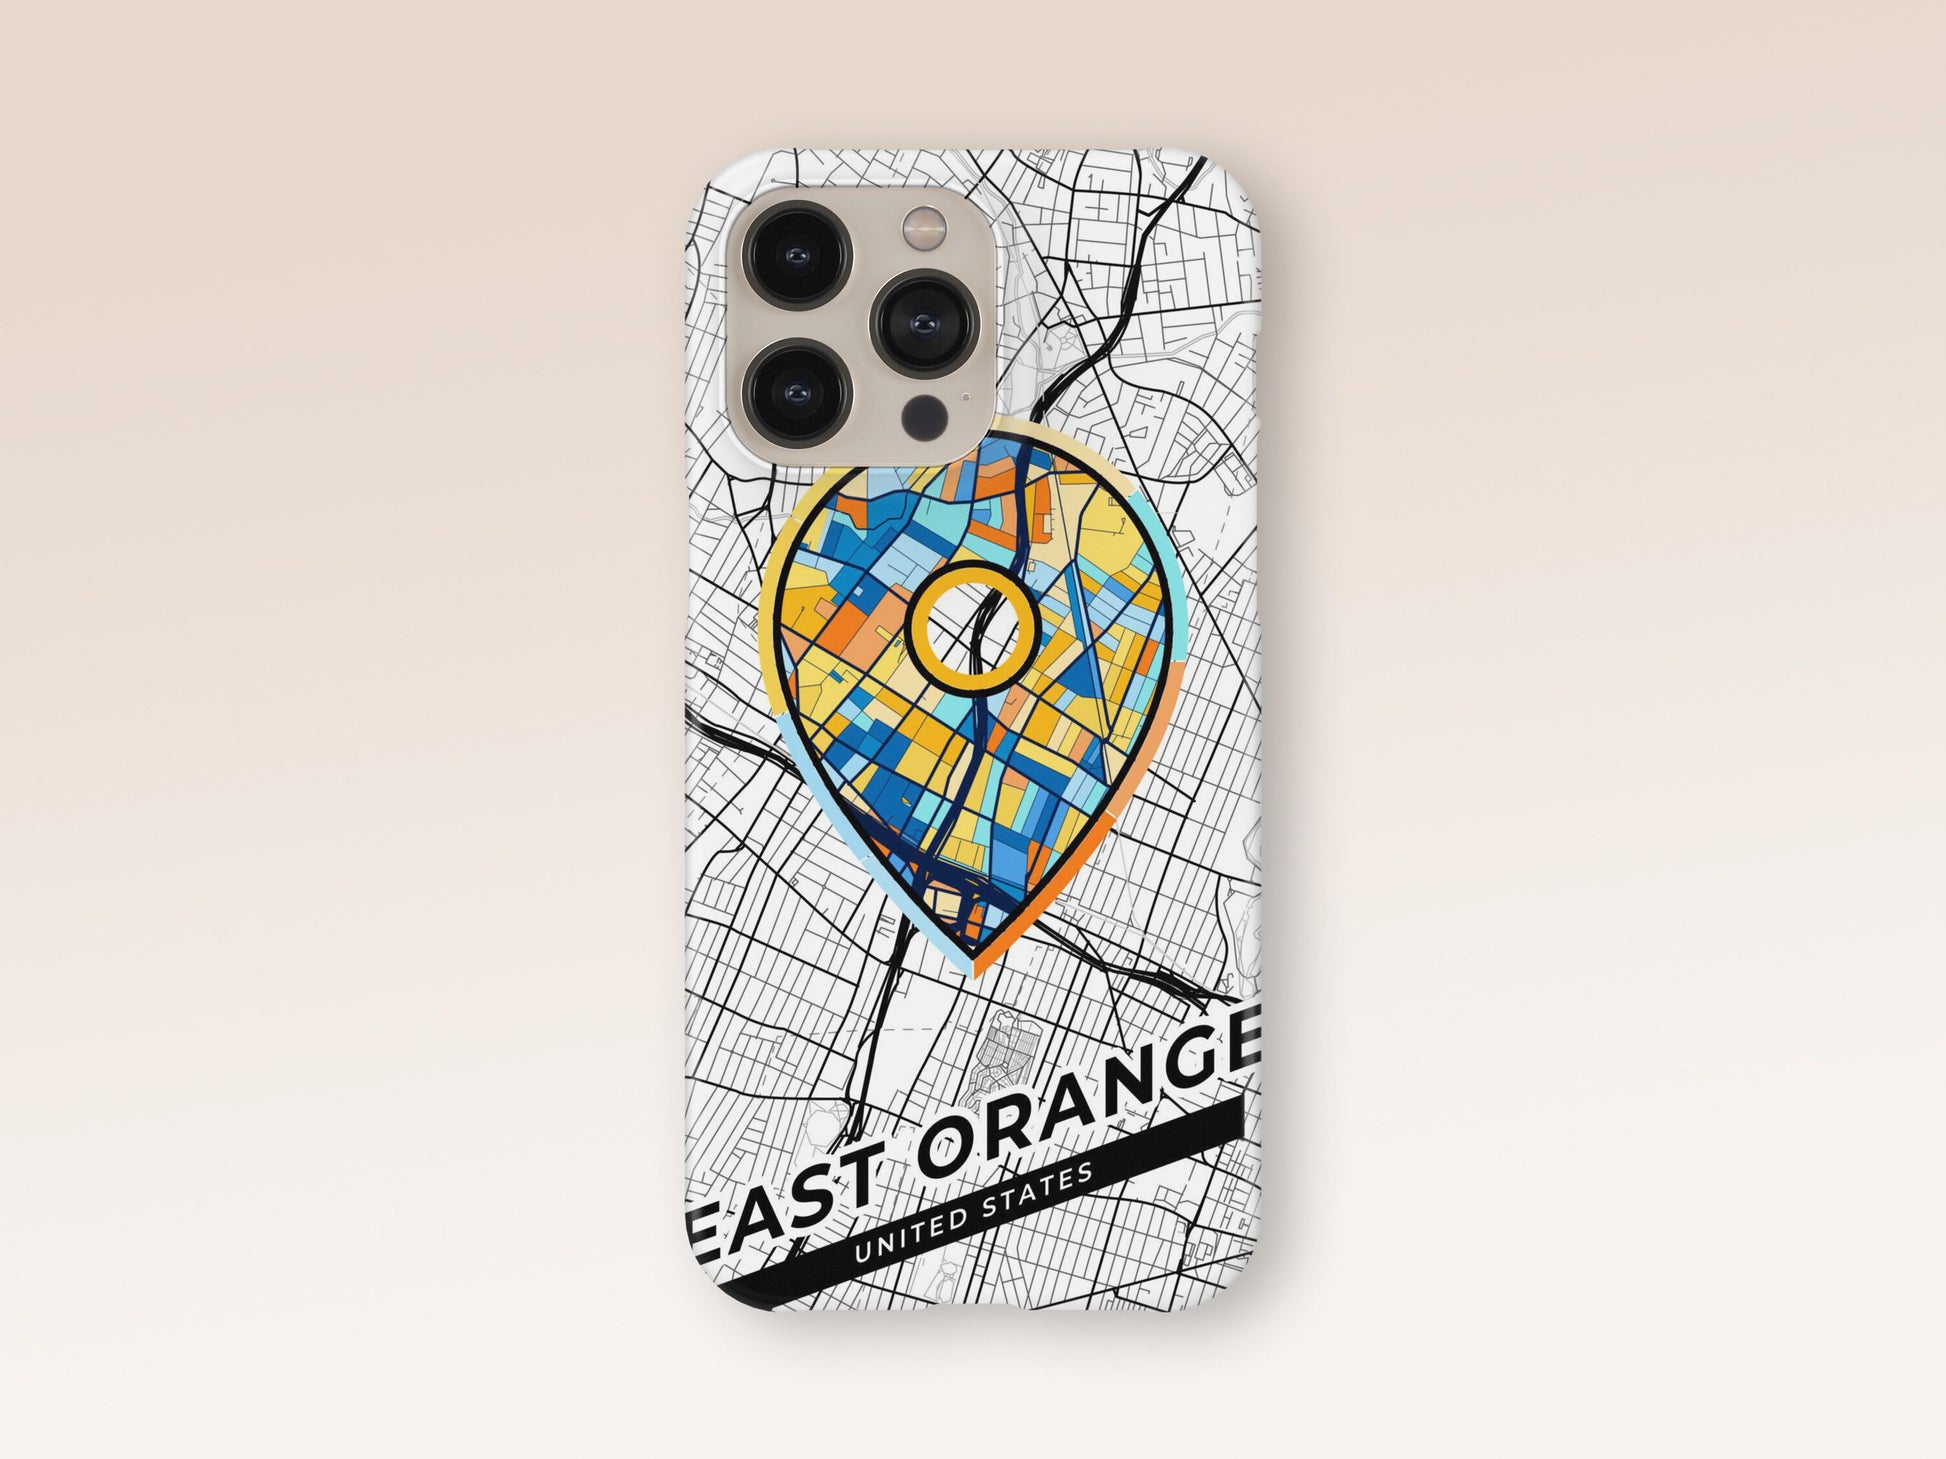 East Orange New Jersey slim phone case with colorful icon. Birthday, wedding or housewarming gift. Couple match cases. 1